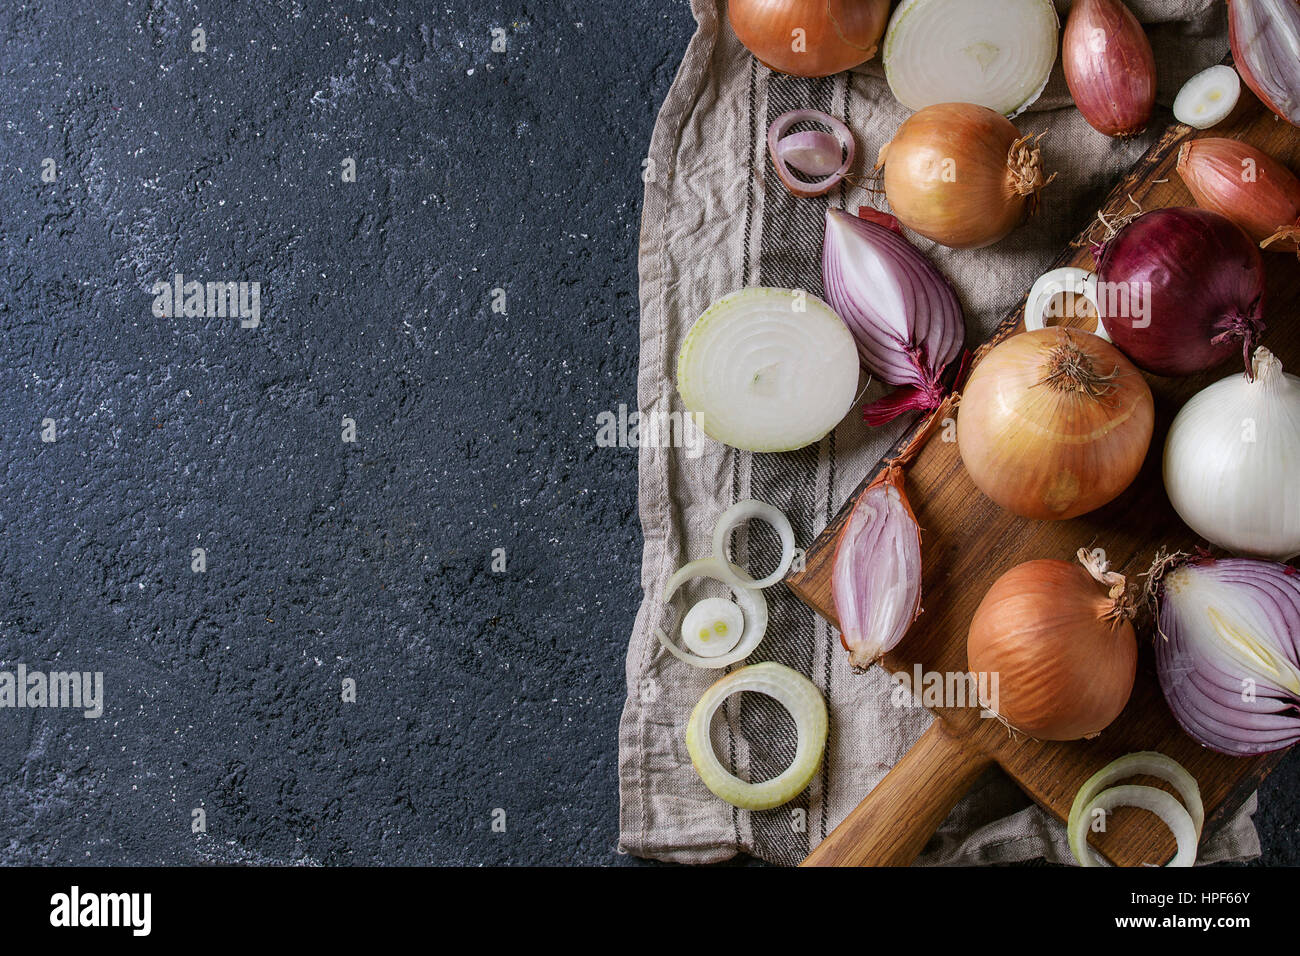 Variety of whole and sliced red, white, yellow and shallot onions on wooden chopping cutting board on textile napkin over dark stone texture backgroun Stock Photo